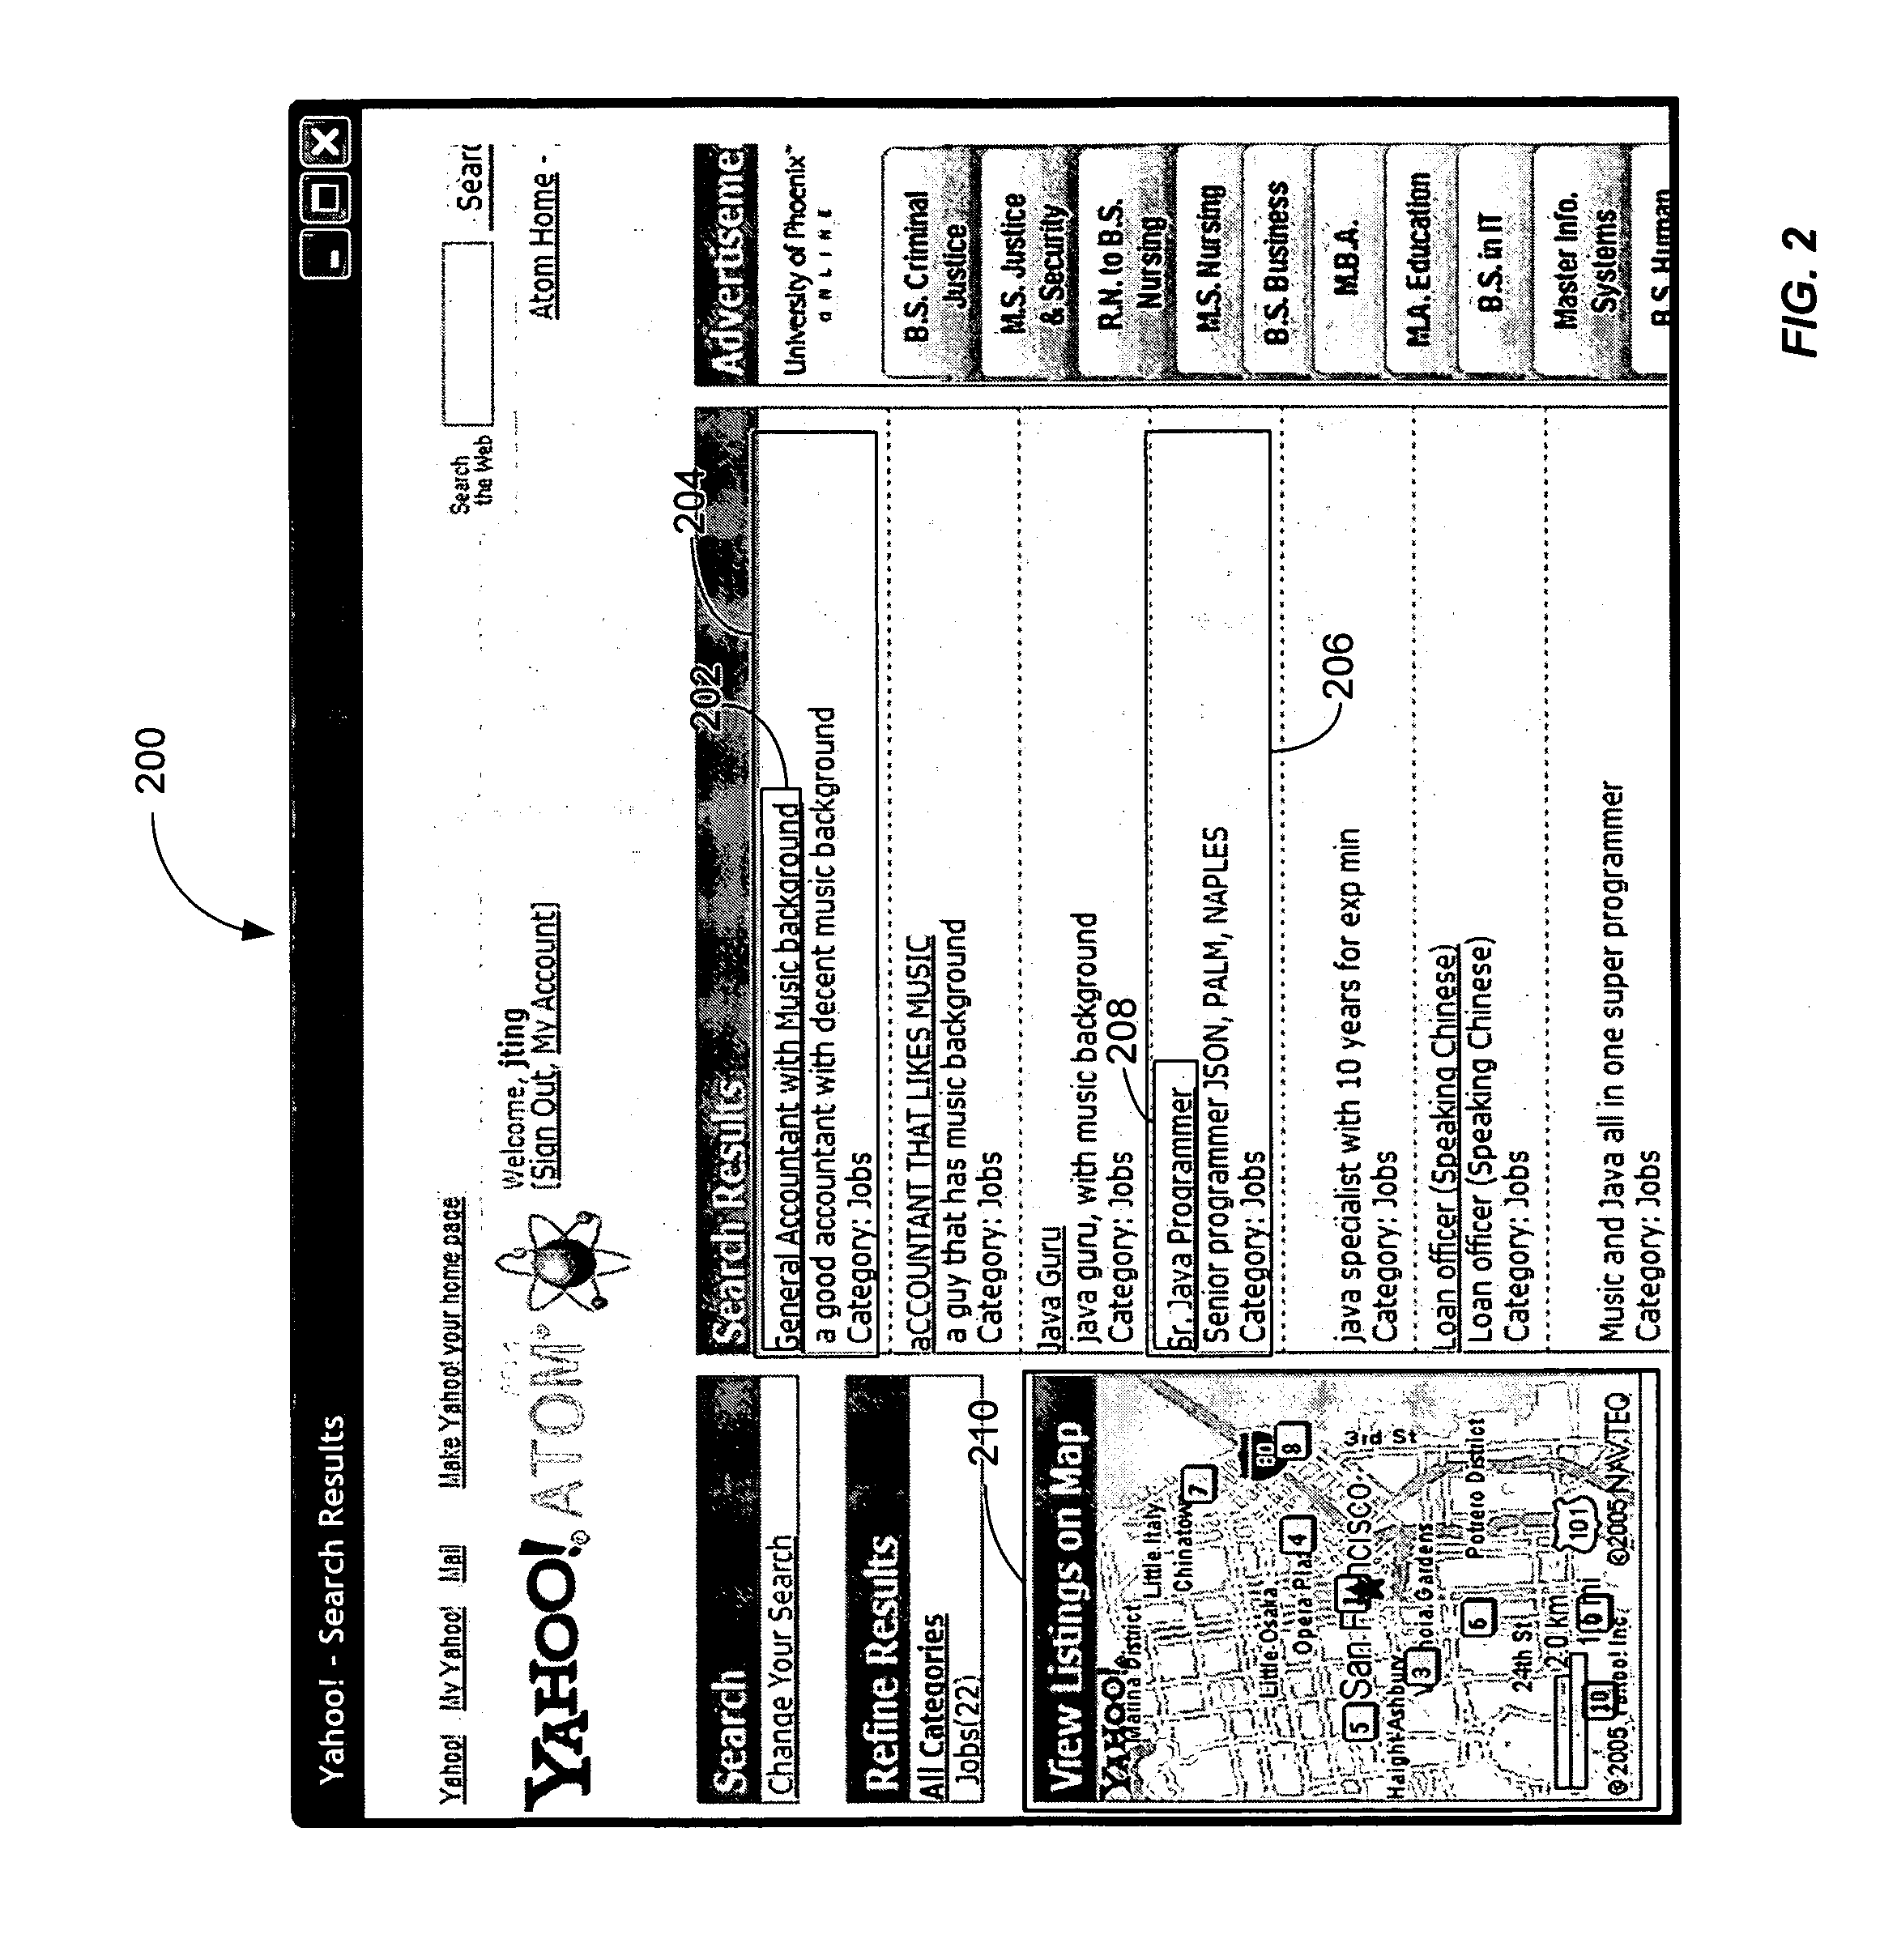 System and method for listing administration